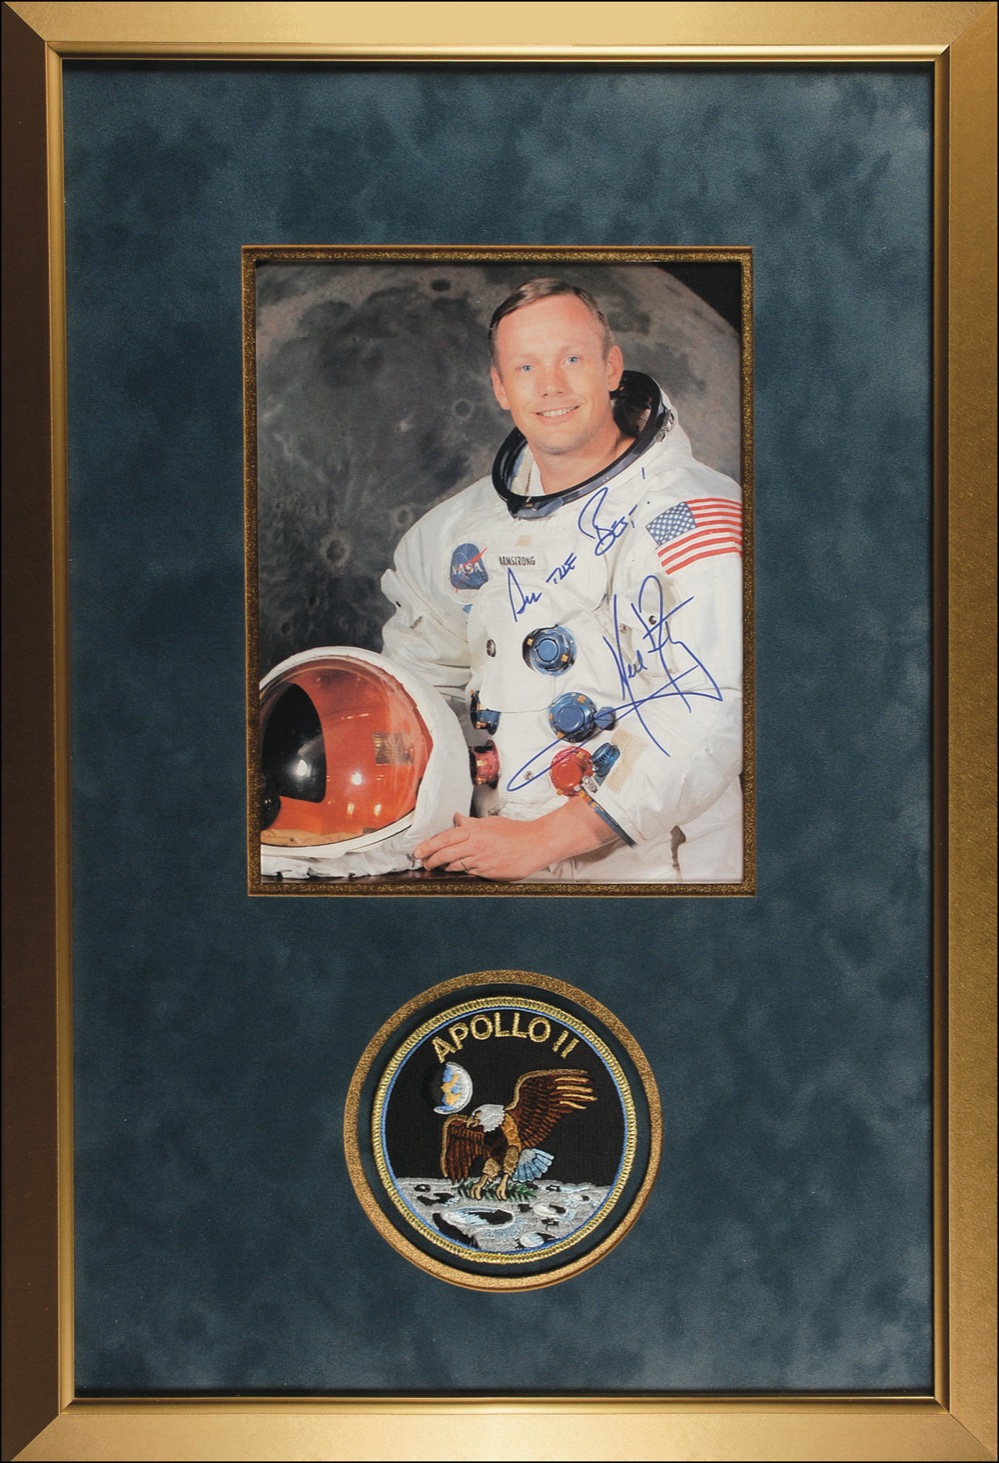 Lot #458 Neil Armstrong